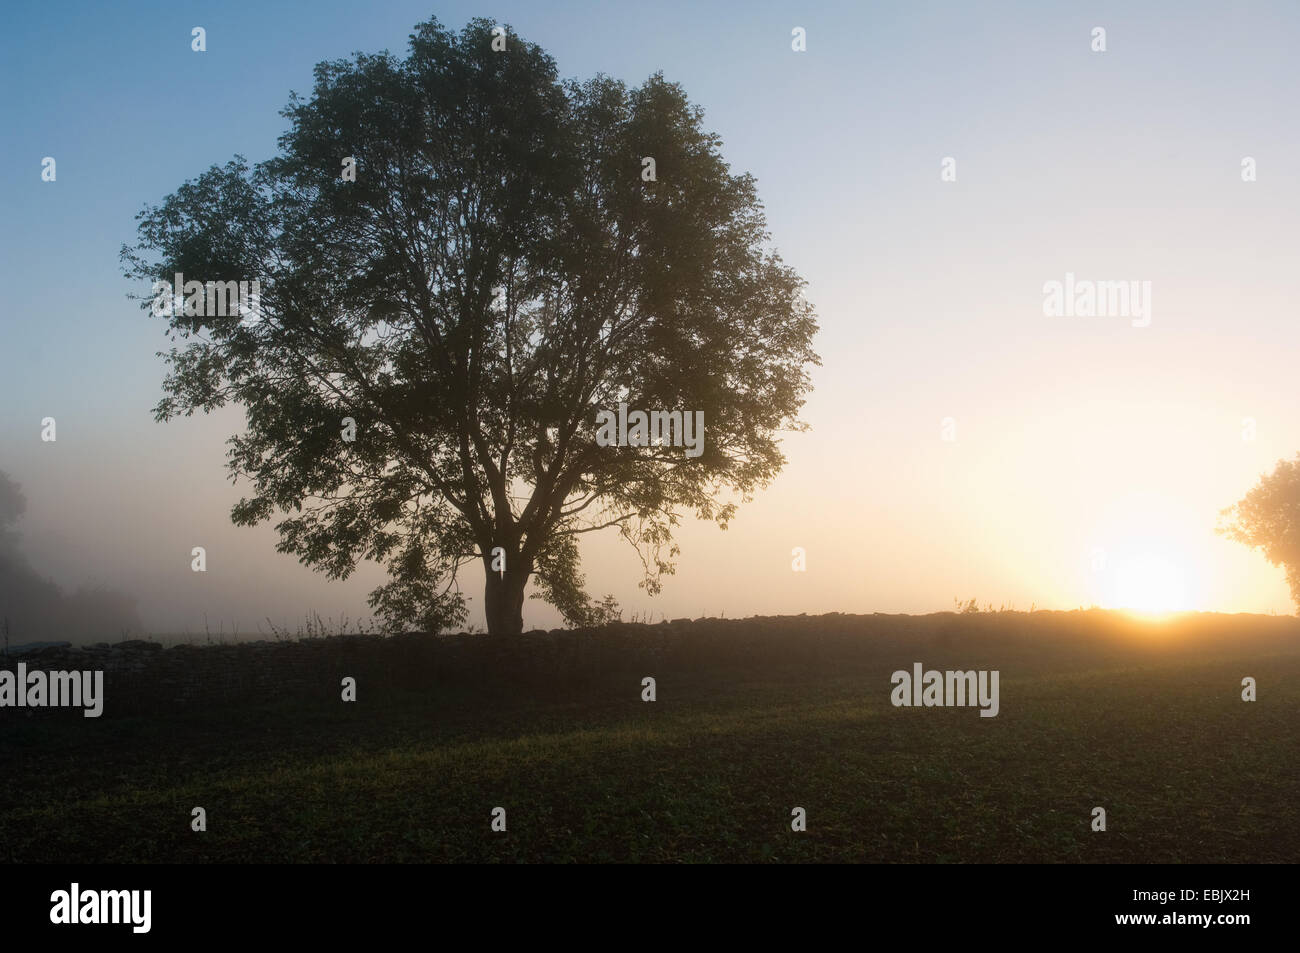 Silhouetted tree in field at sunset Stock Photo